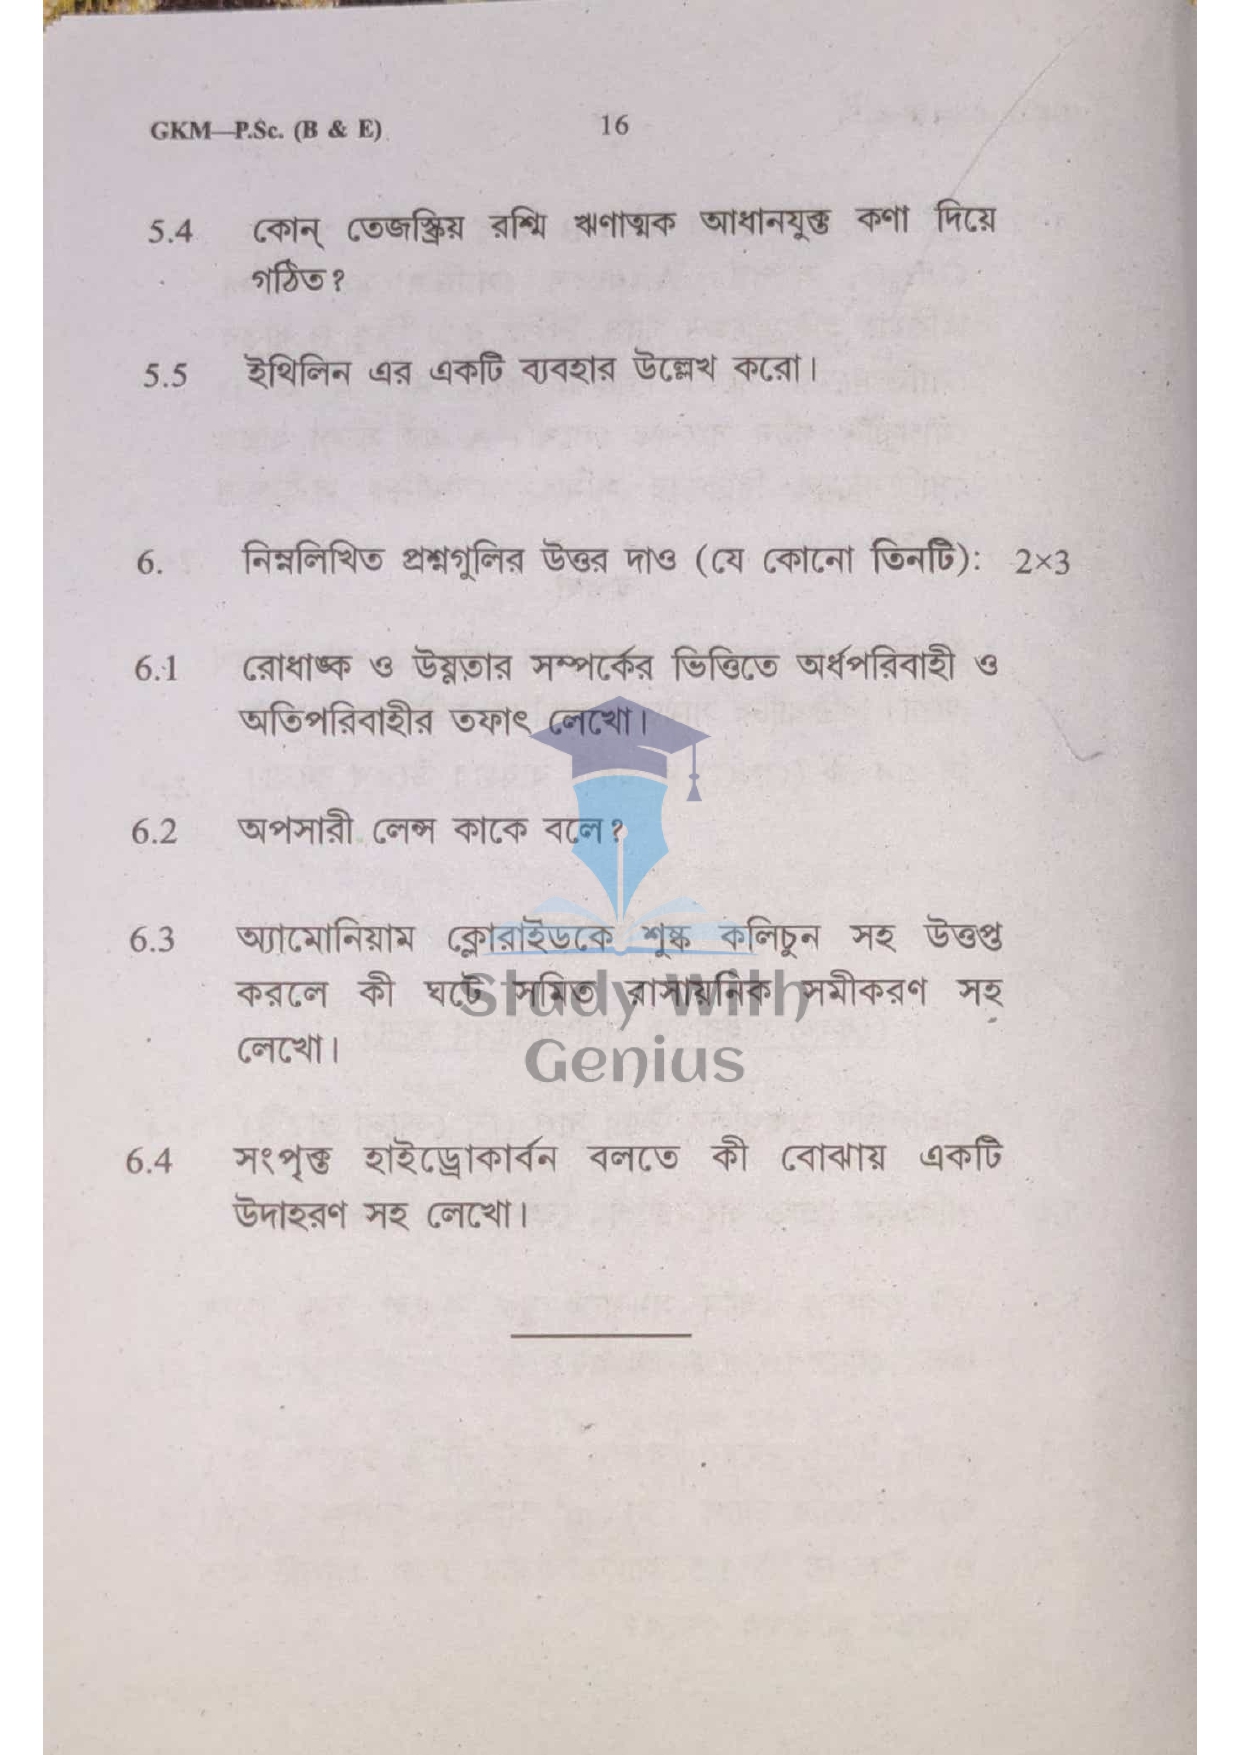 WBBSE Madhyamika Physical Science Subject Question Papers Bengali Medium 2020